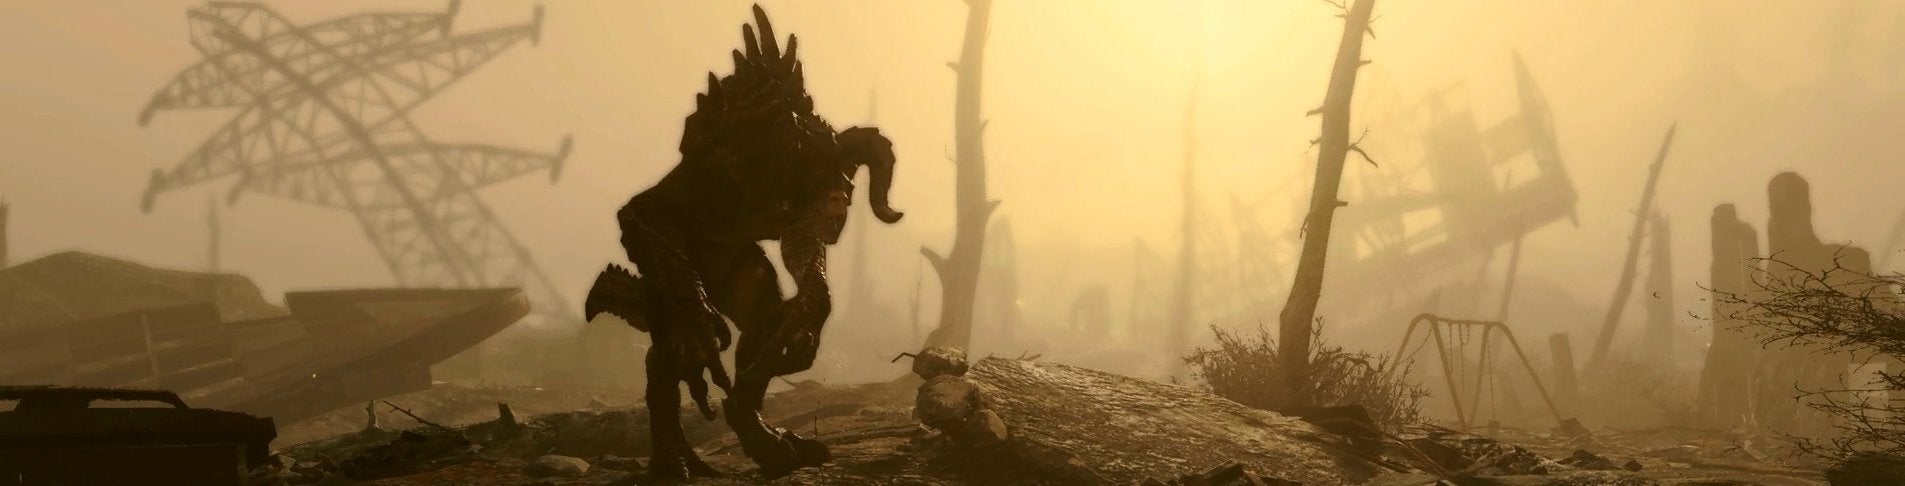 Image for Watch: Fallout 4 - your guide to the nuclear apocalypse